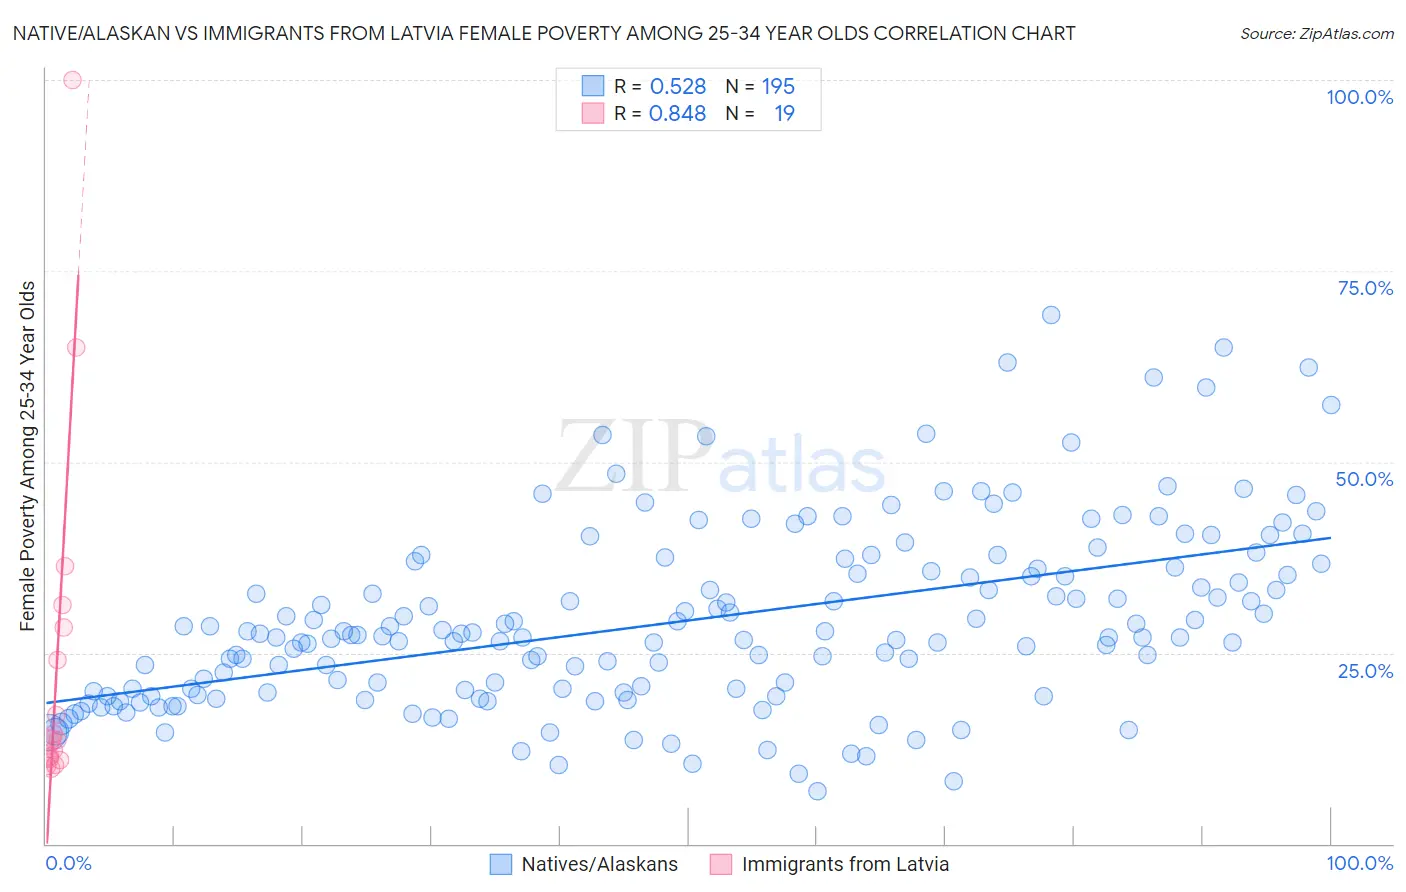 Native/Alaskan vs Immigrants from Latvia Female Poverty Among 25-34 Year Olds